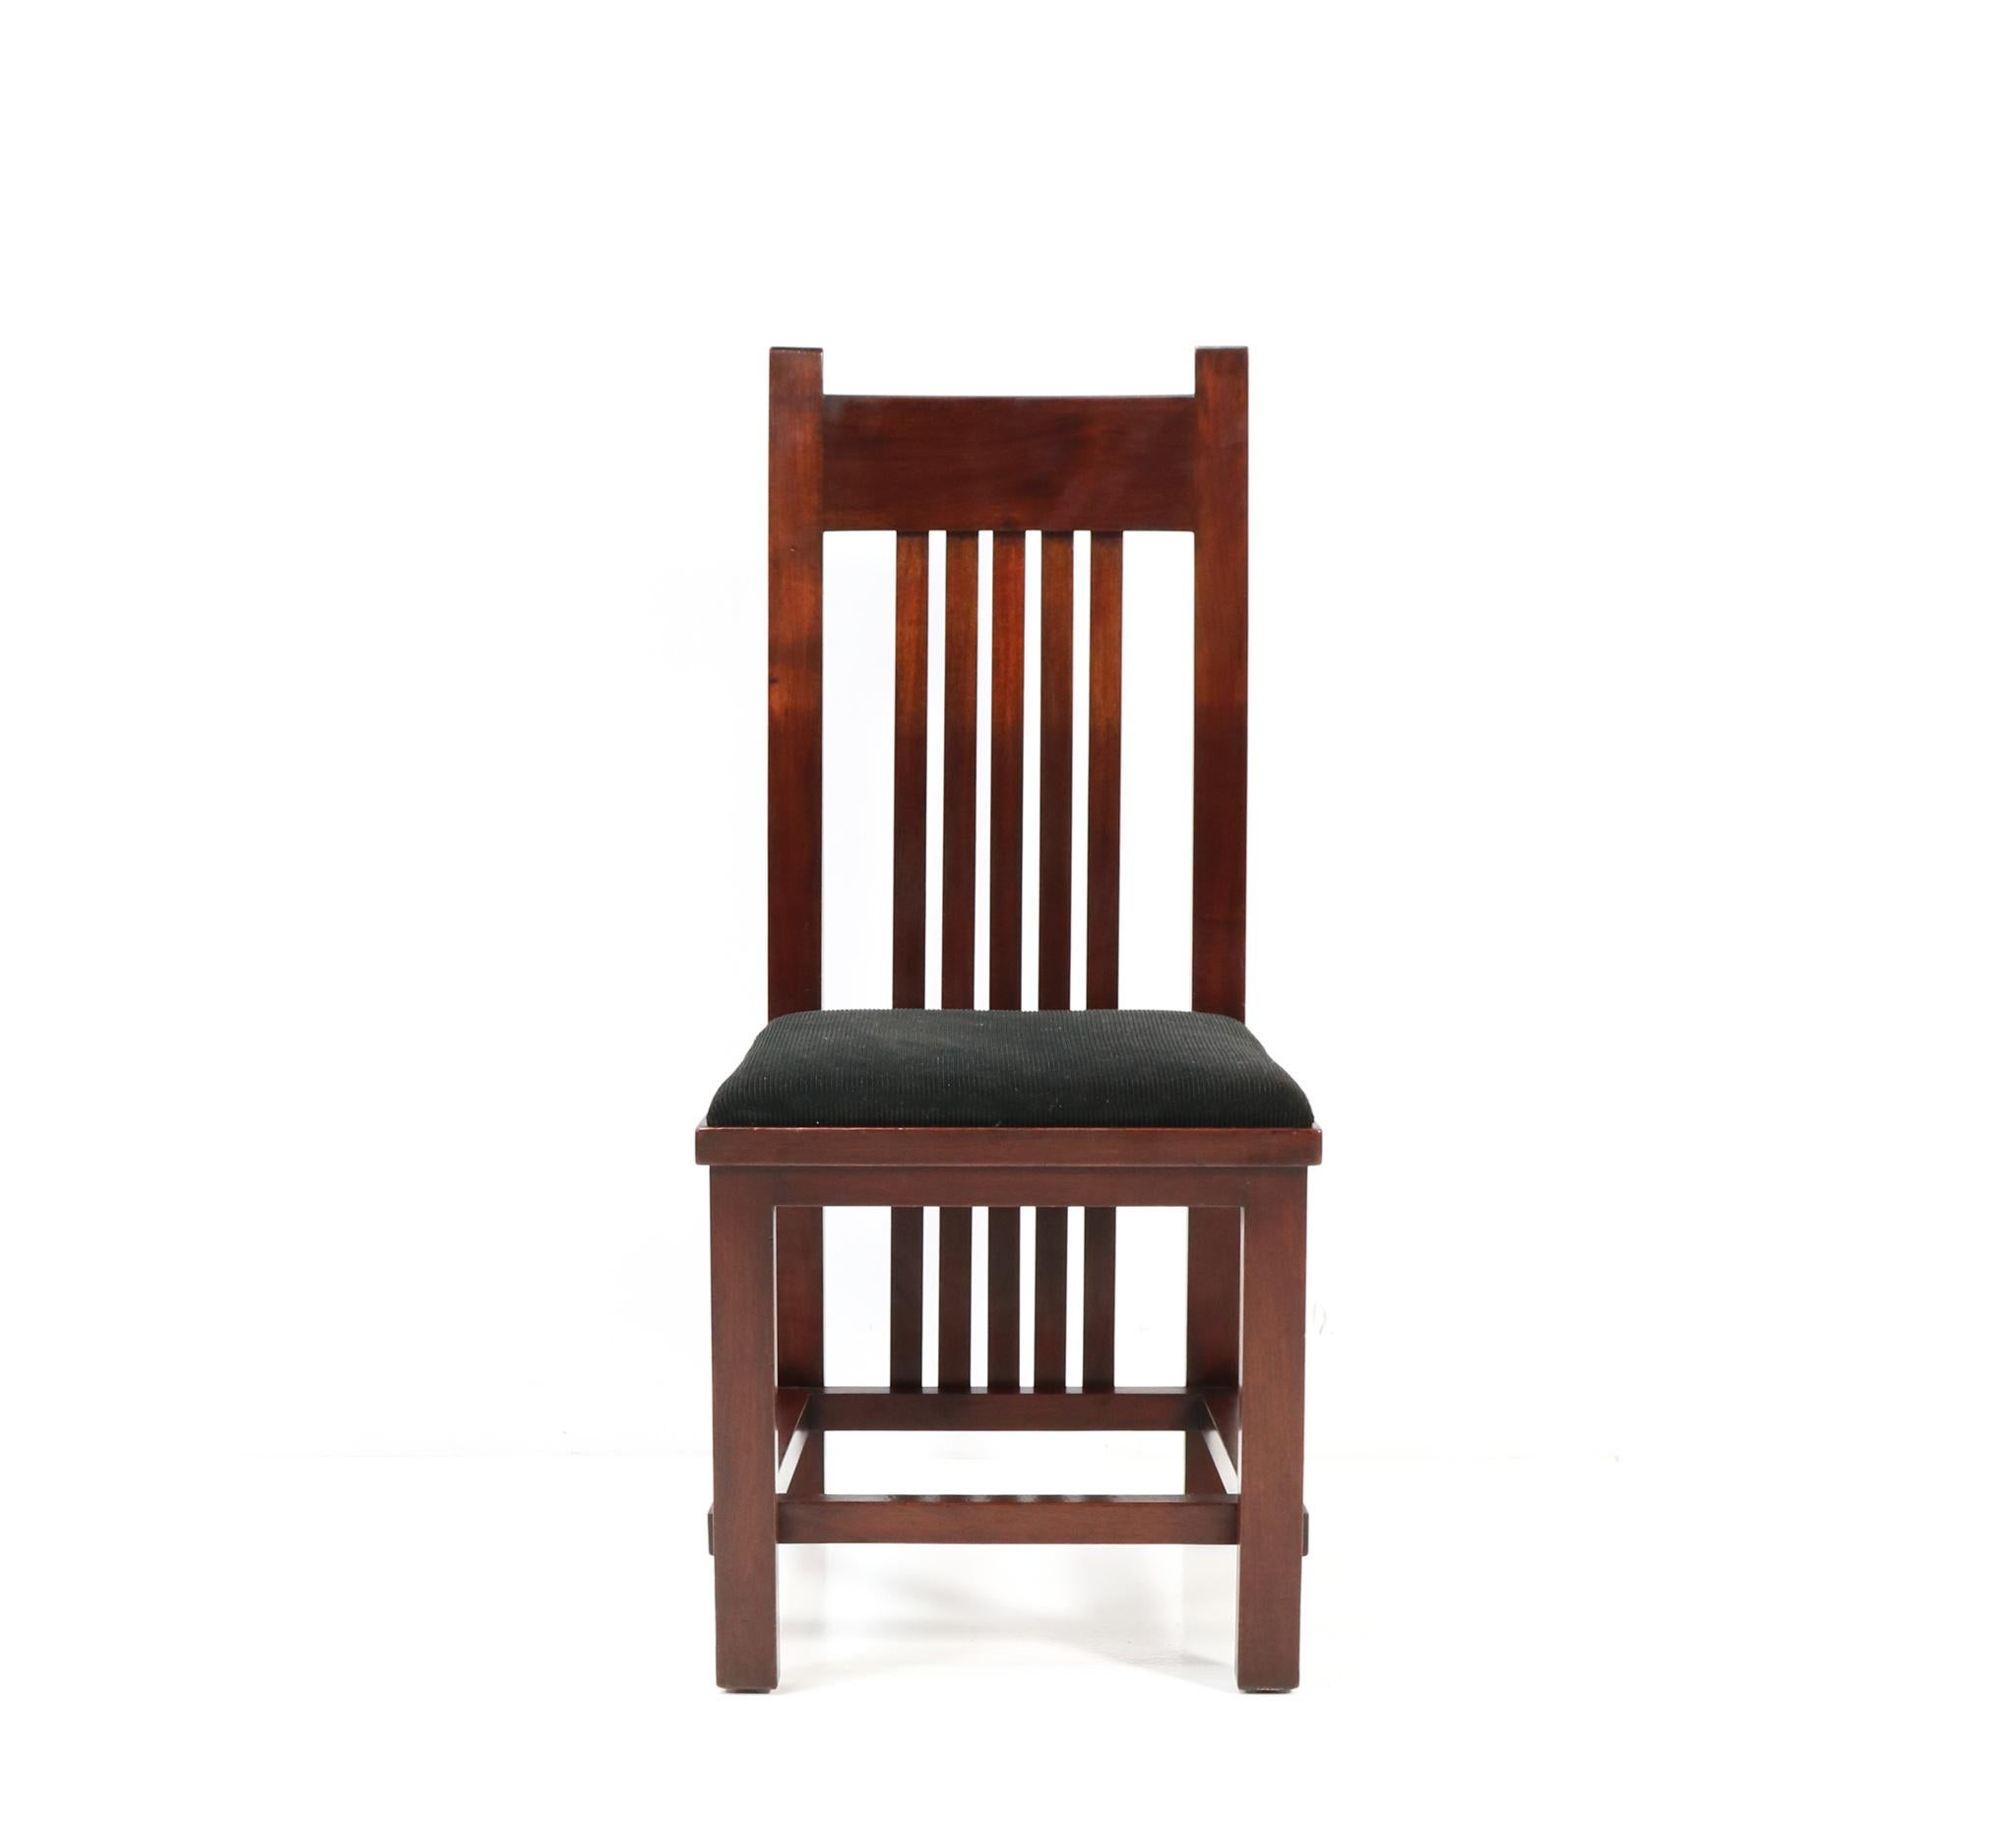 Magnificent and ultra rare Art Deco Modernist high back side chair.
Design by Hendrik Wouda for H. Pander & Zonen The Hague.
Striking Dutch design from the 1920s.
Solid mahogany frame with the high back which is typical for several designs